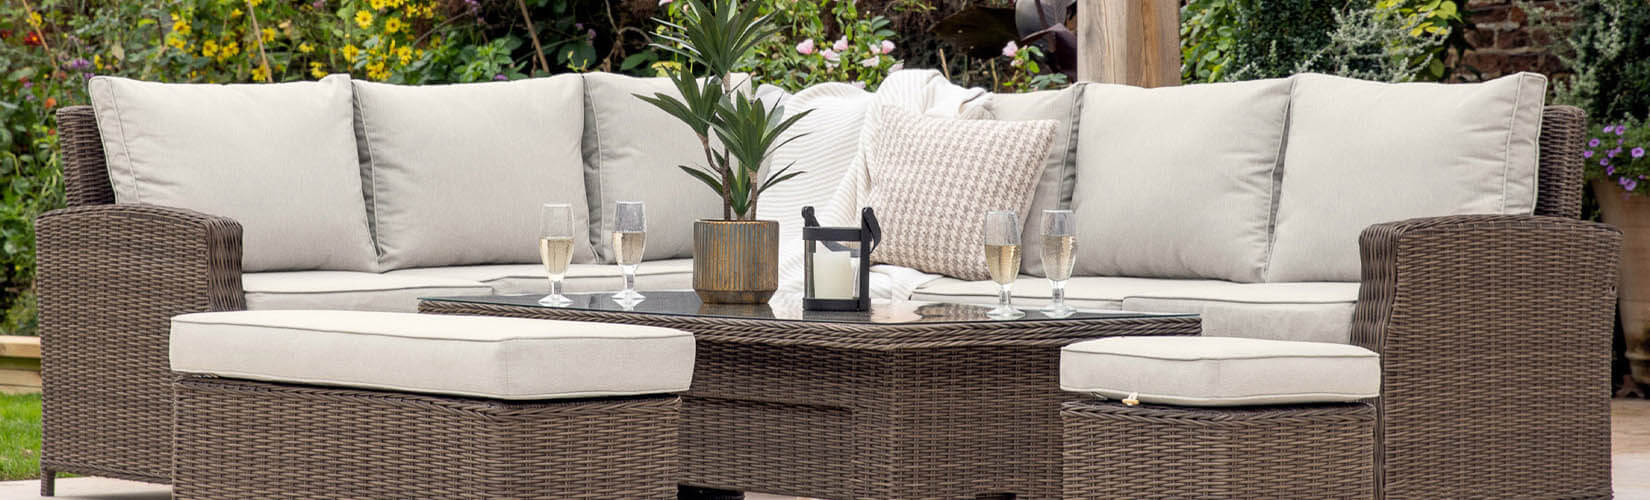 Introducing Stylish & Affordable Garden Furniture from Pavilion Chic